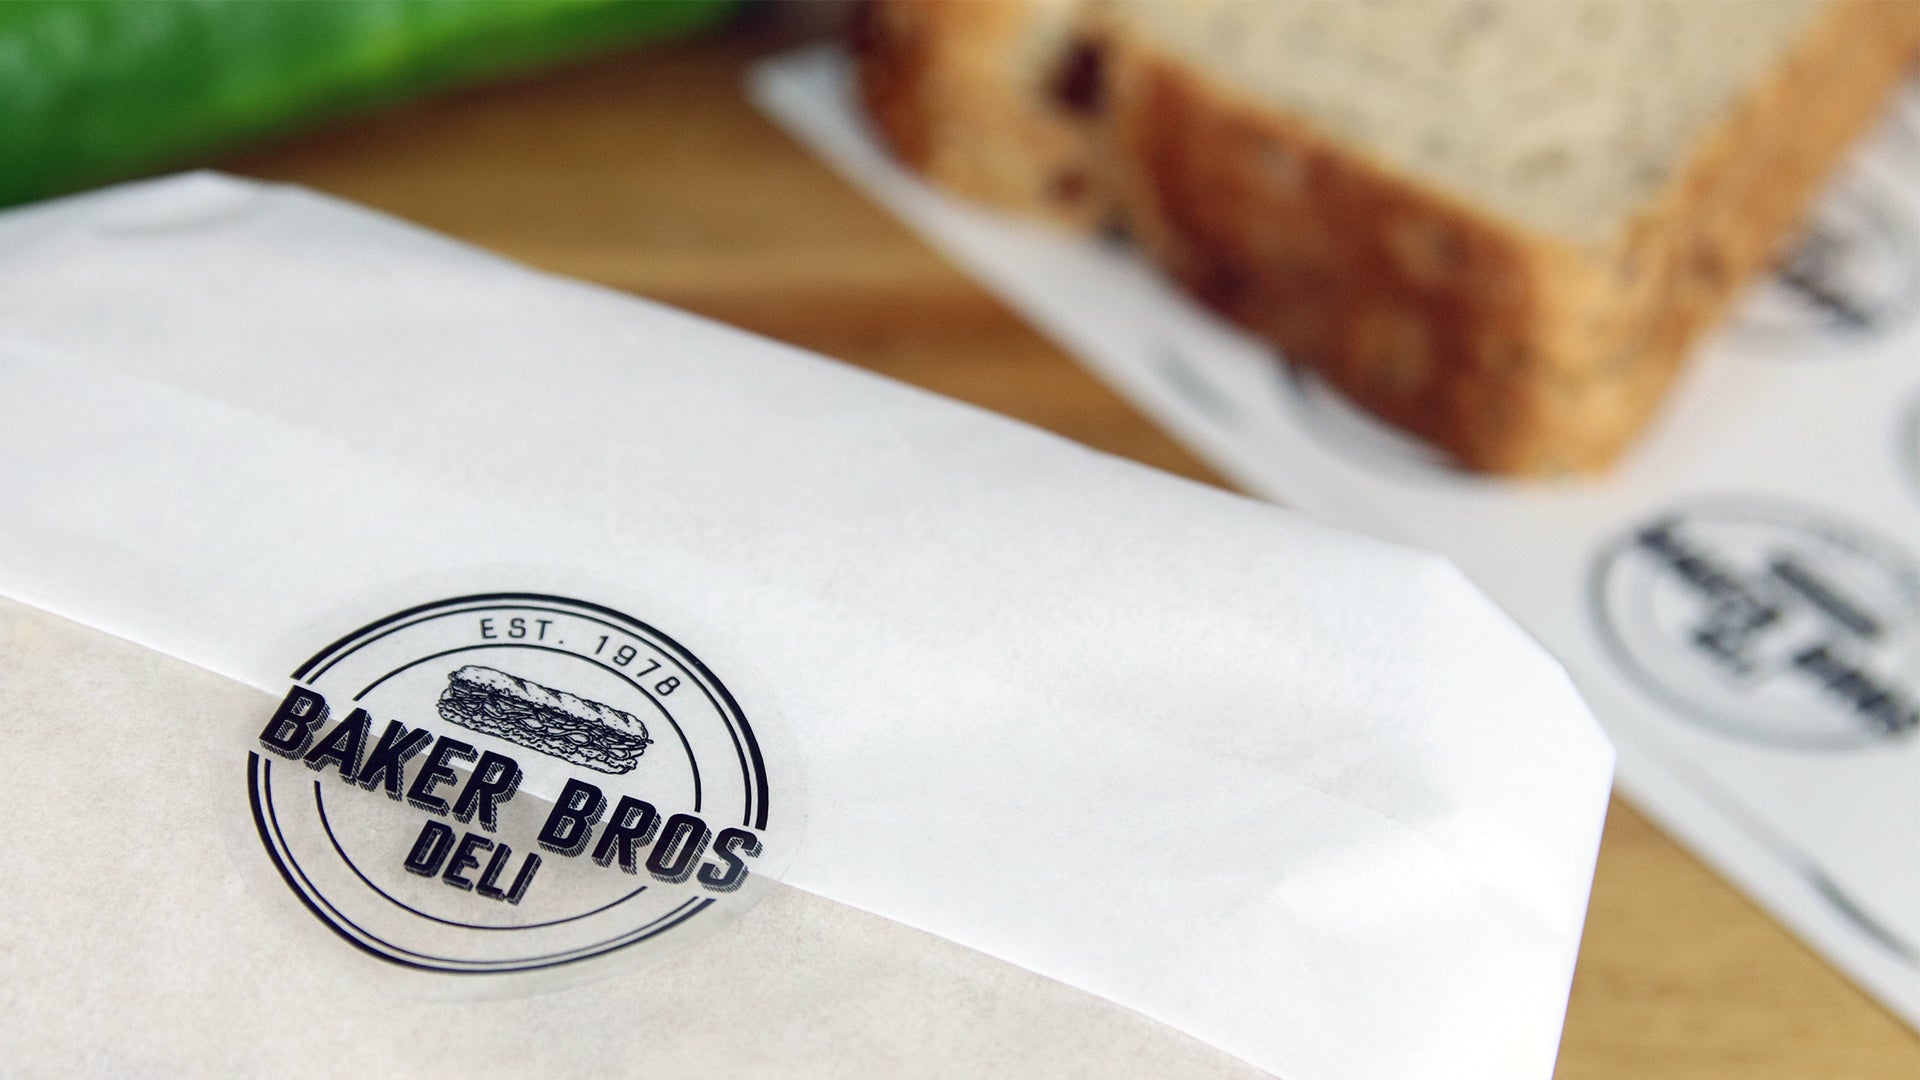 Clear glossy label round with baker bros logo applied to seal a sandwich wrapper